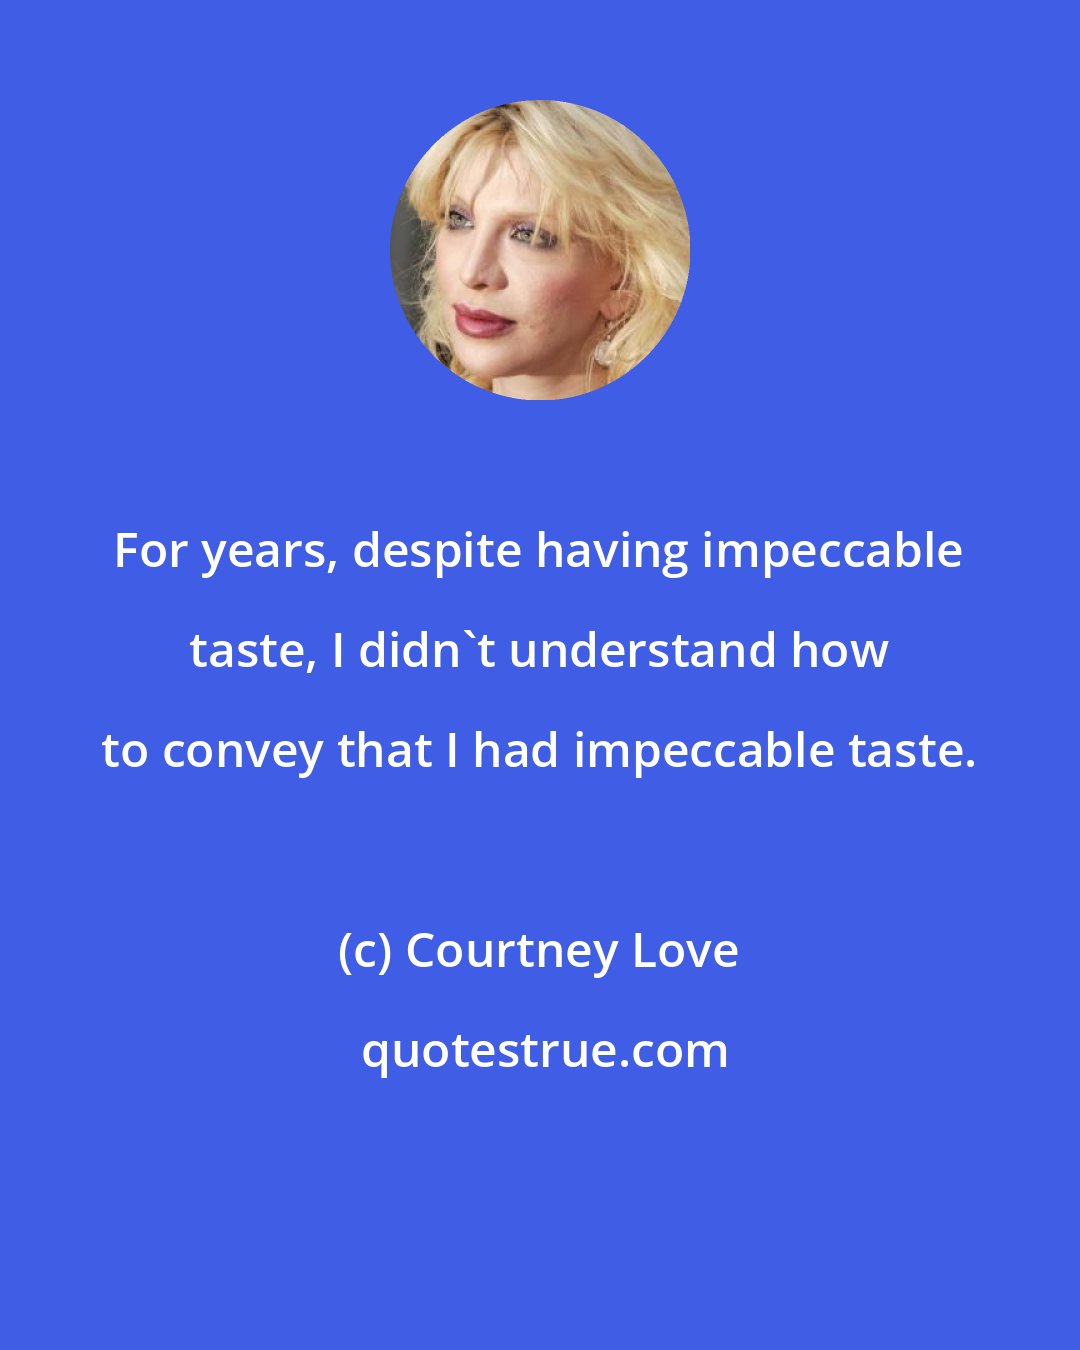 Courtney Love: For years, despite having impeccable taste, I didn't understand how to convey that I had impeccable taste.